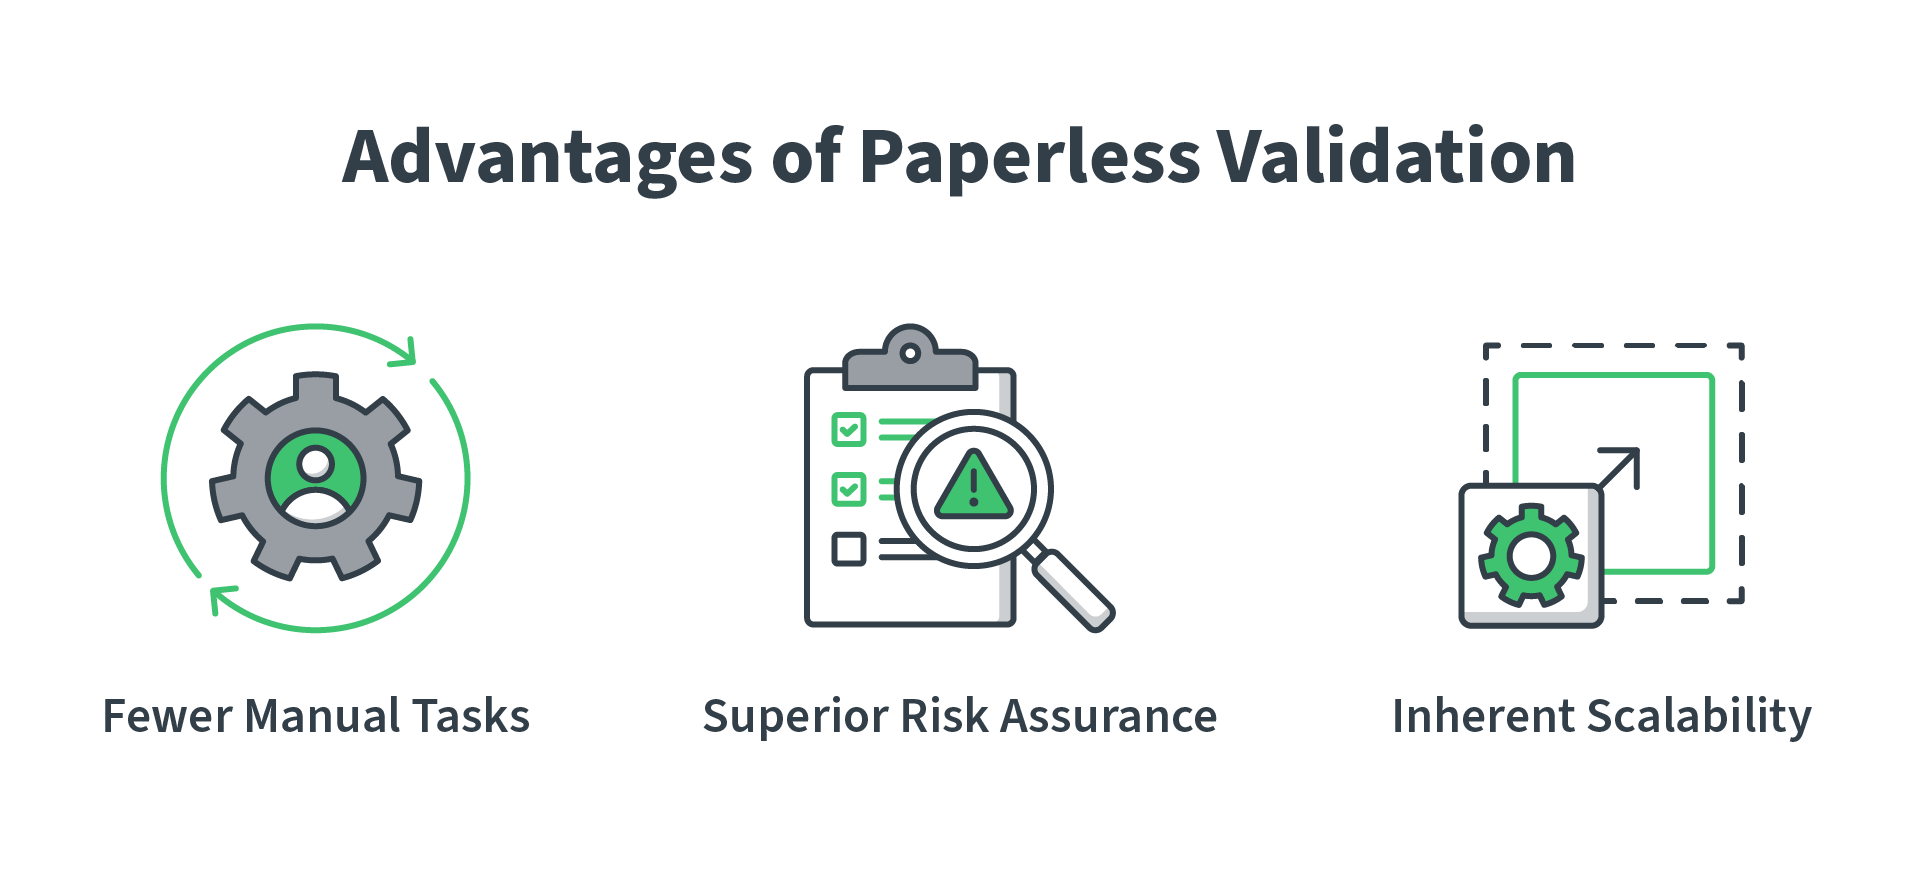 What are the Advantages of Paperless Validation?